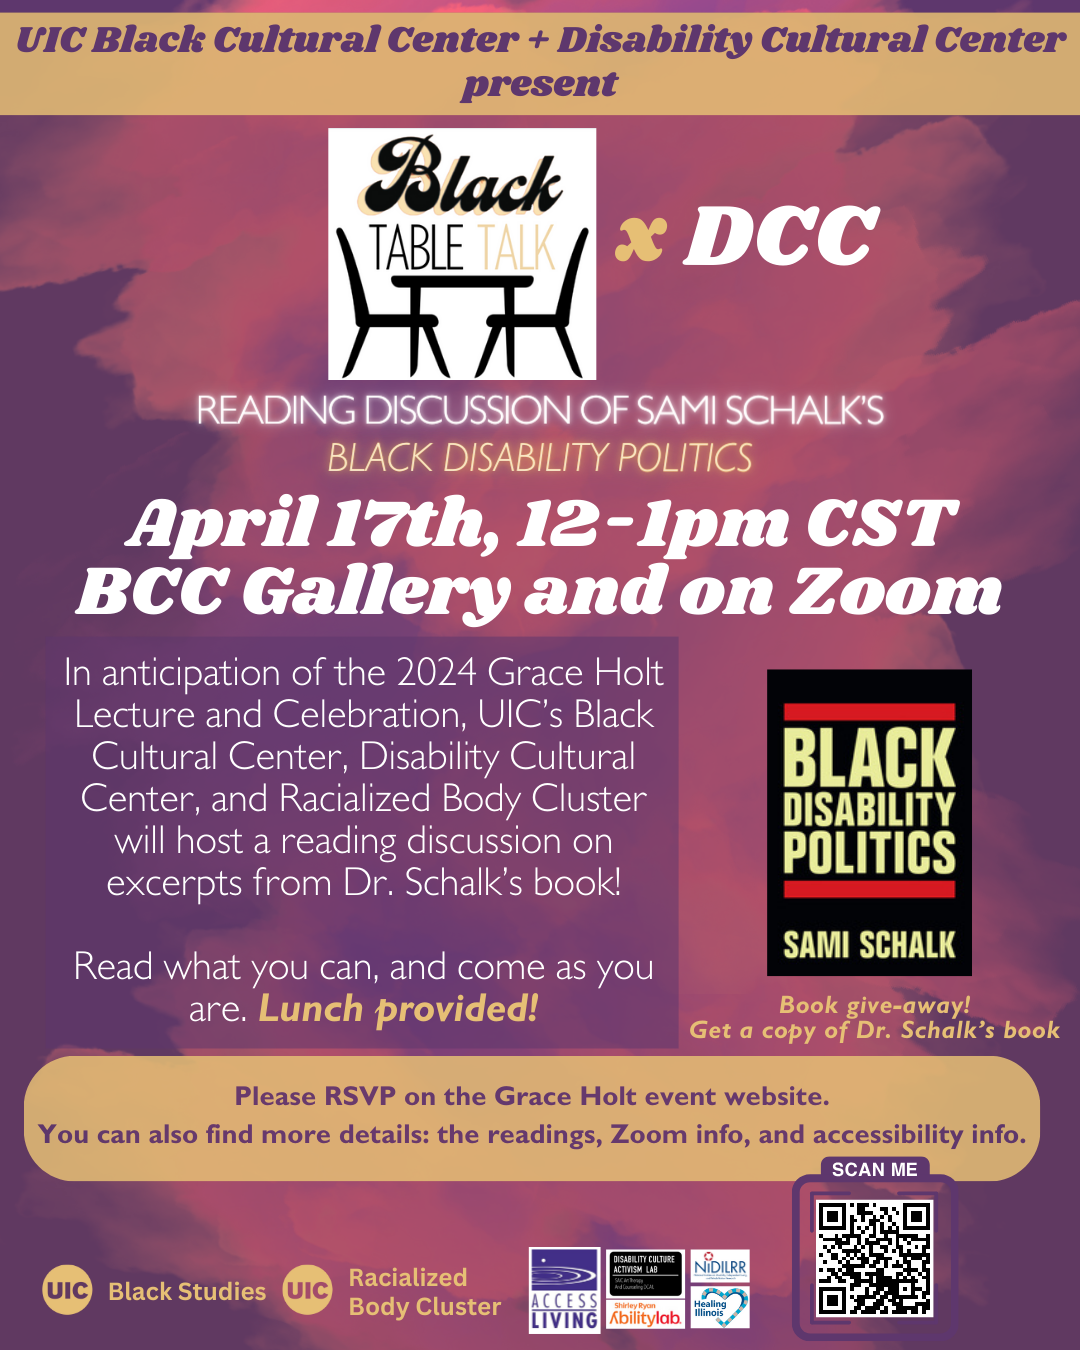 event flyer. purple, pink, and red background. image of black table talk logo and black disability politics book. event information